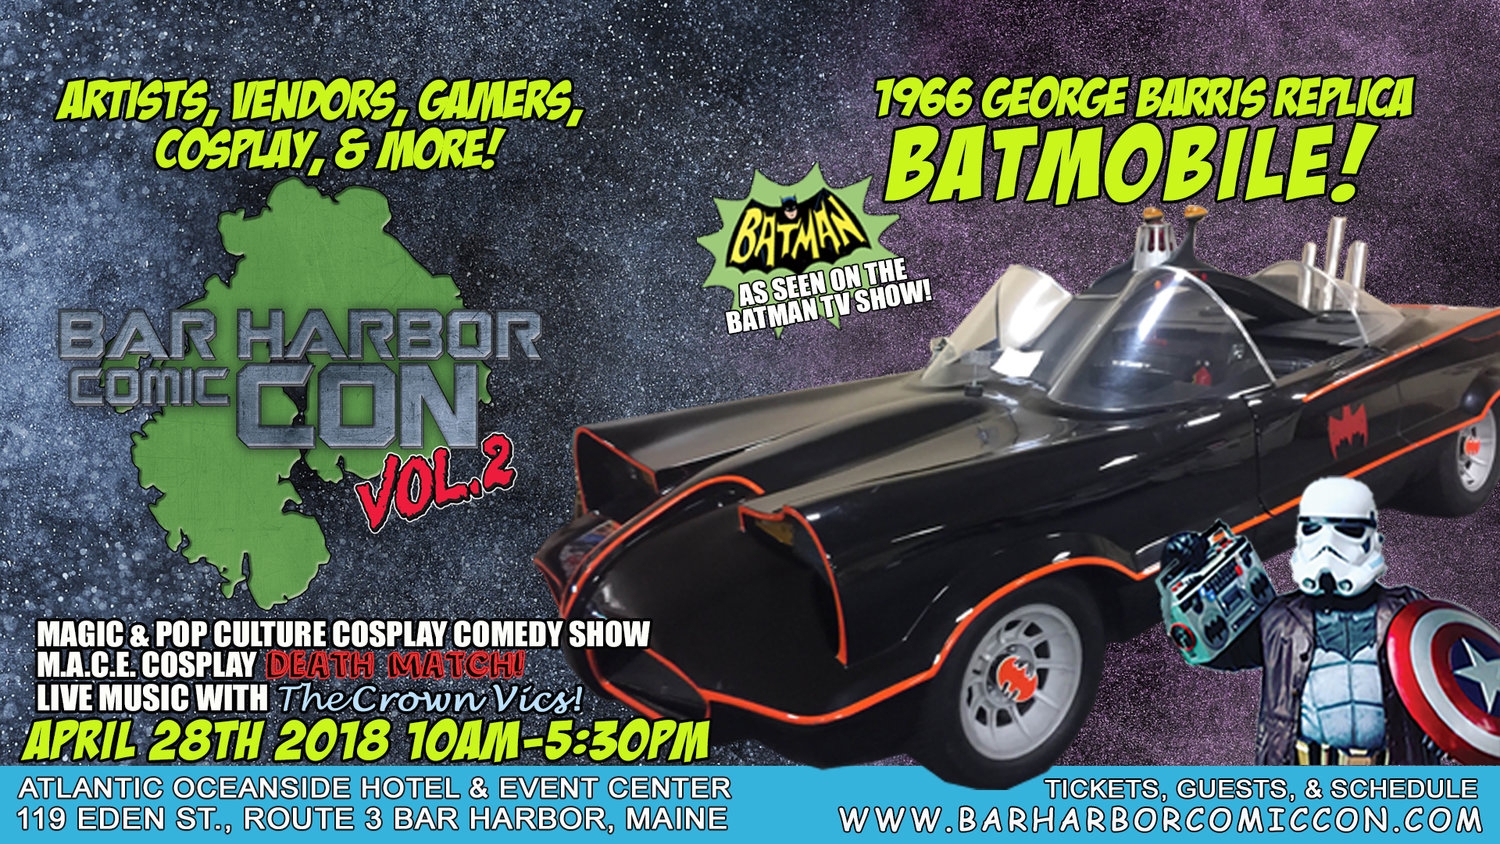 COMIC CON HIGHWAY NORTHERN EXIT:: -ME- Jay Piscopo Guest, Bar Harbor comic con this weekend April 28th